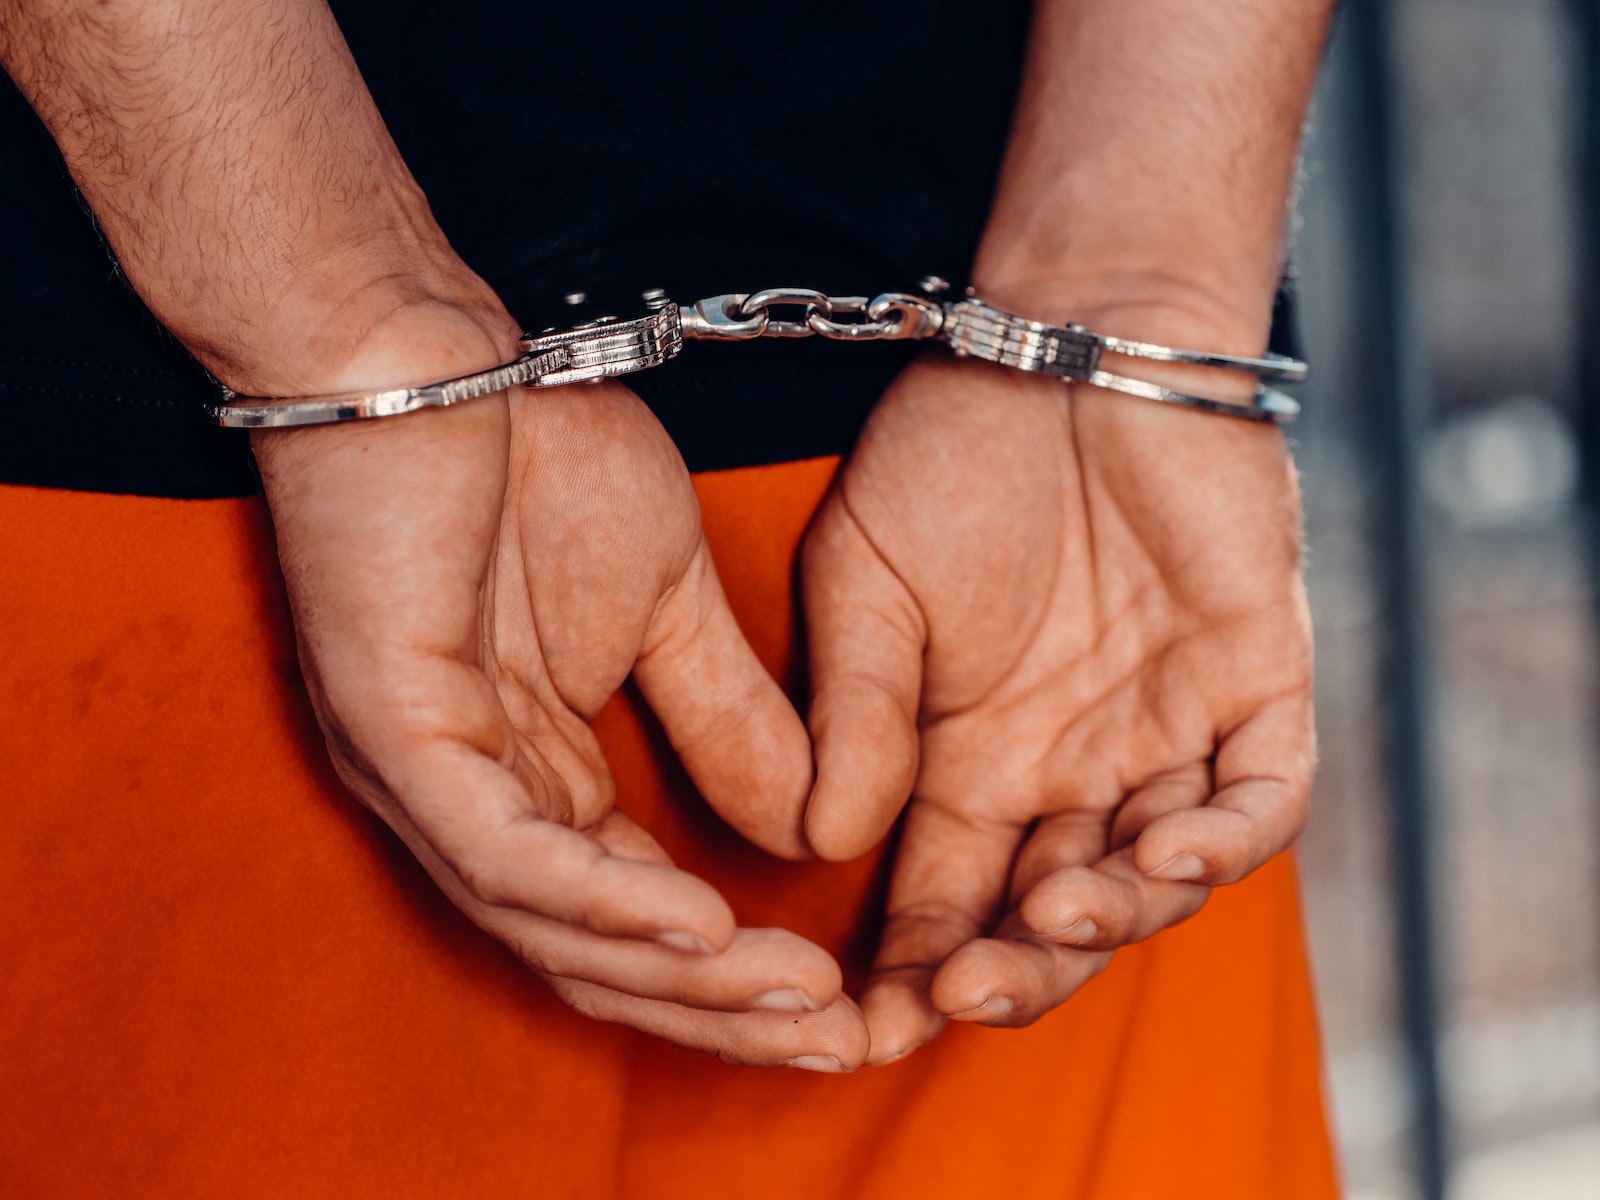 Close-Up Shot of a Person with Handcuffs